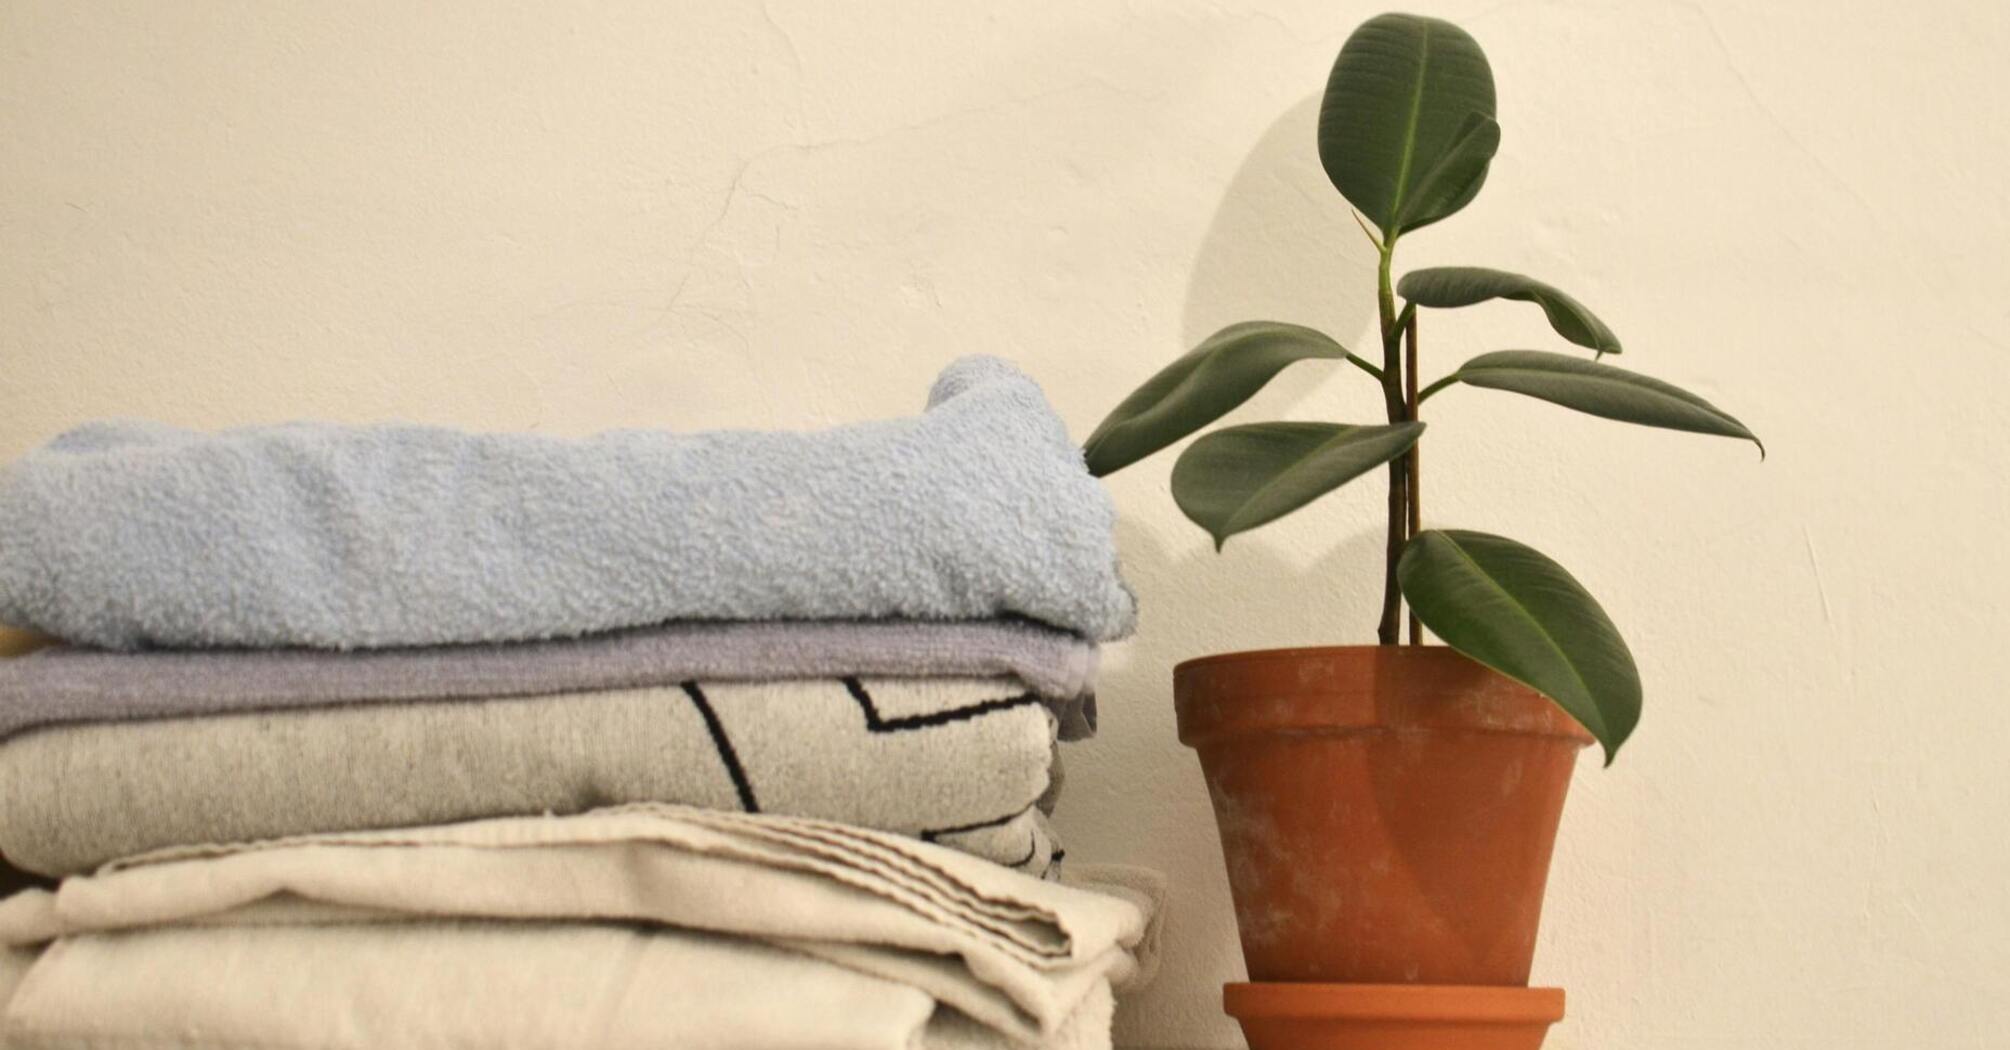 Put one of these 3 plants in your apartment to remove all negativity